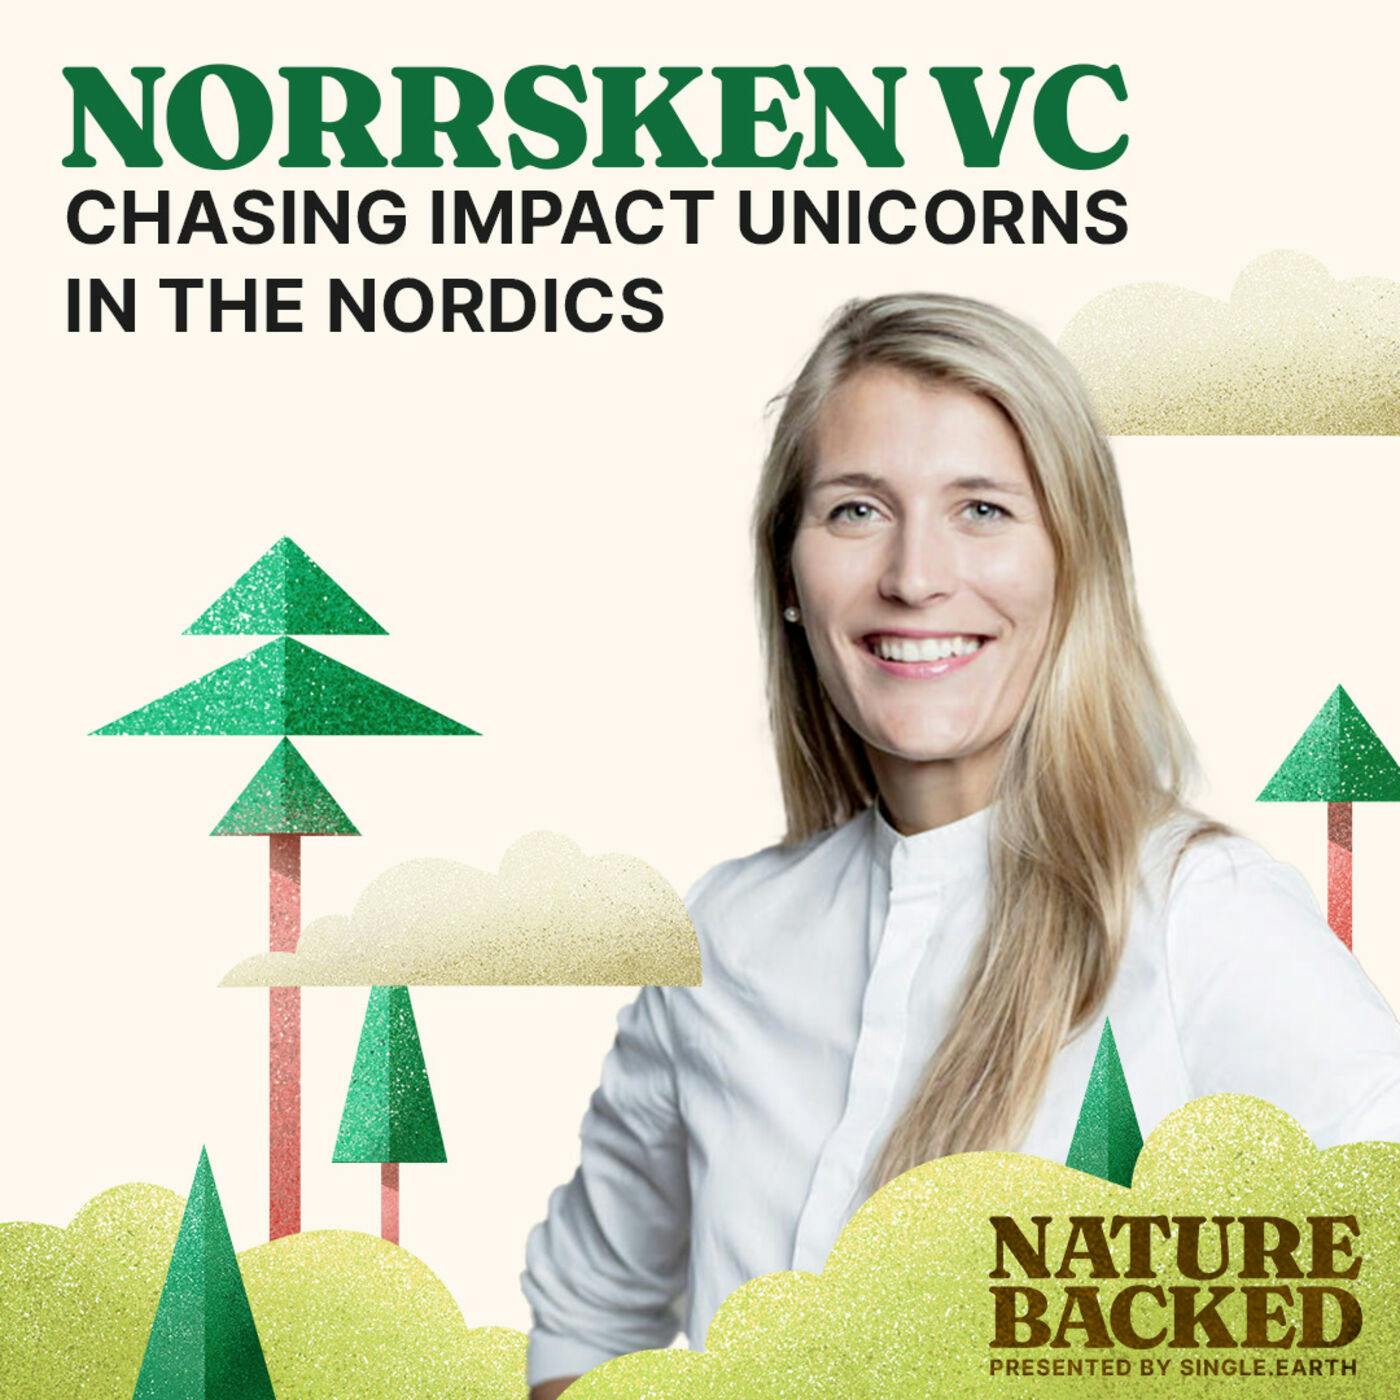 Chasing Uncompromising Impact Unicorns with Norrsken VC